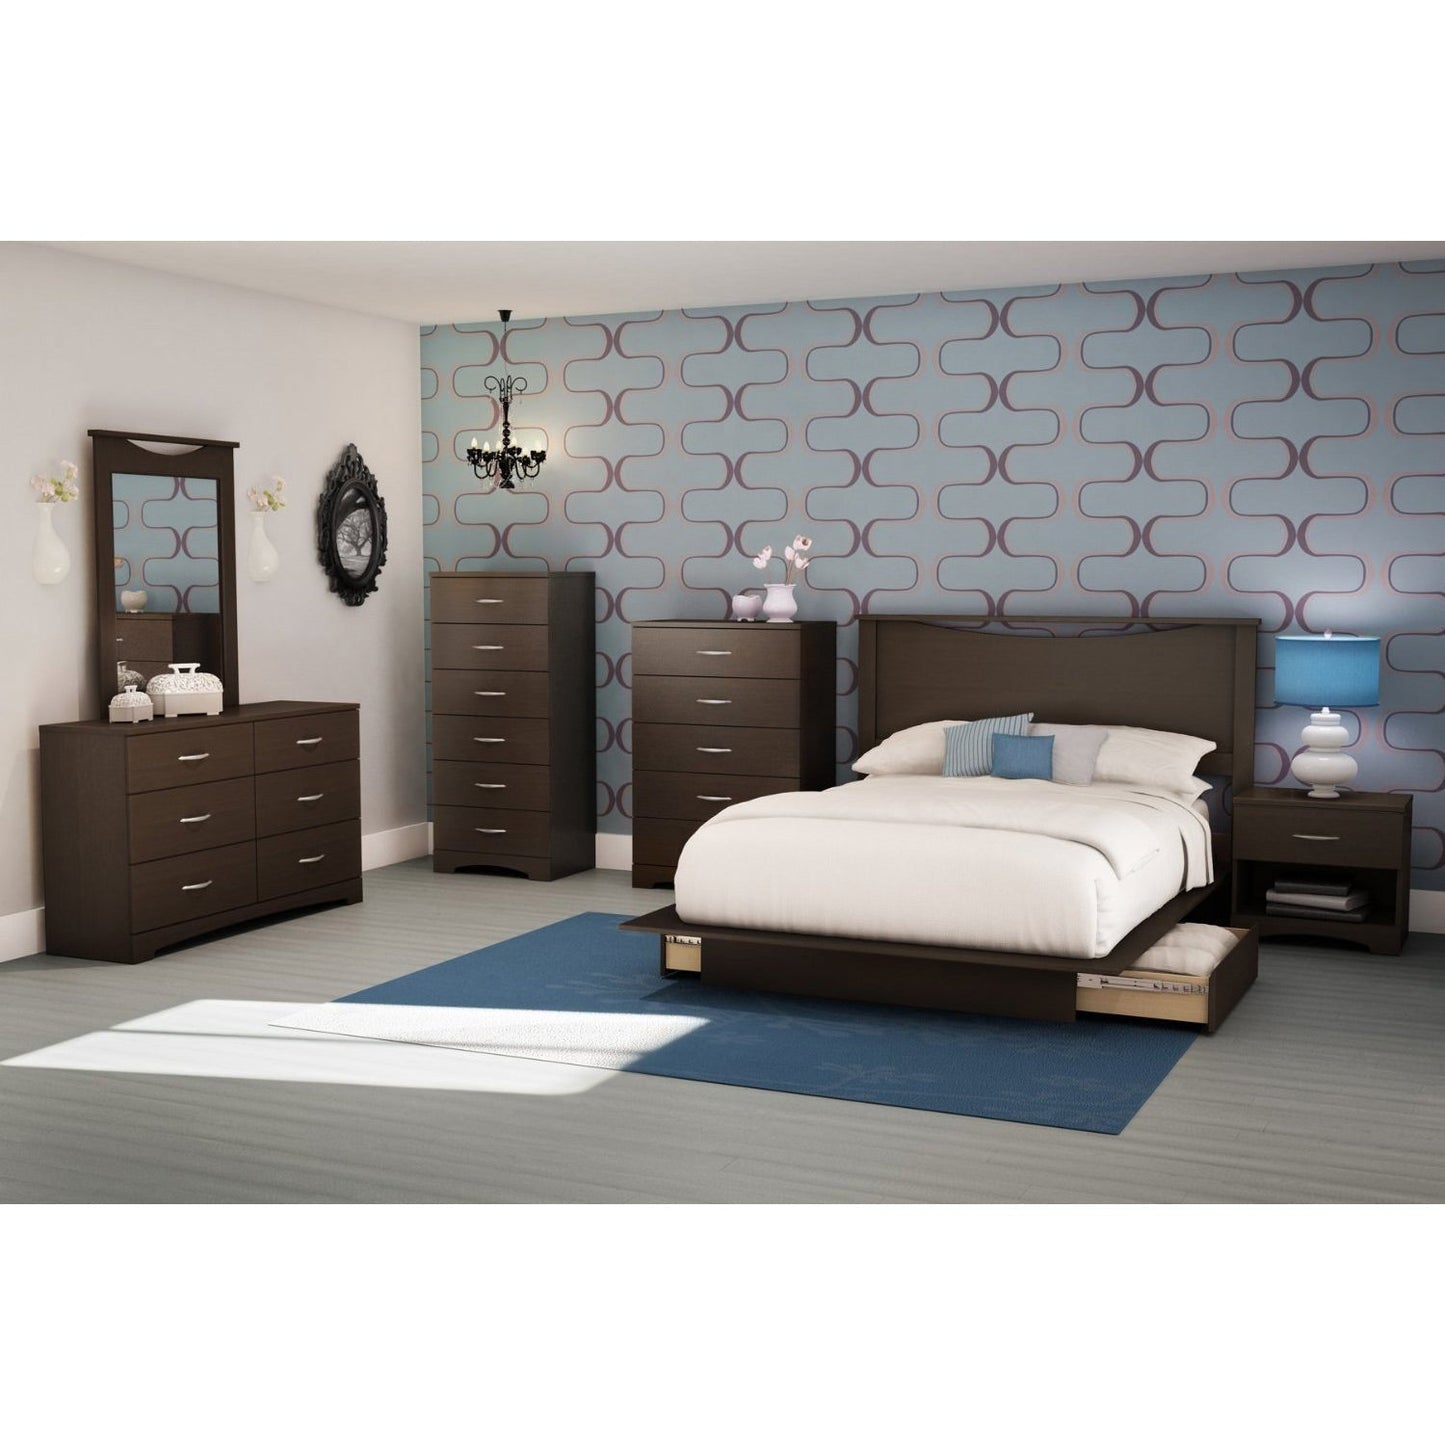 Bedroom > Nightstand And Dressers - Modern 5 Drawer Bedroom Chest In Chocolate Finish